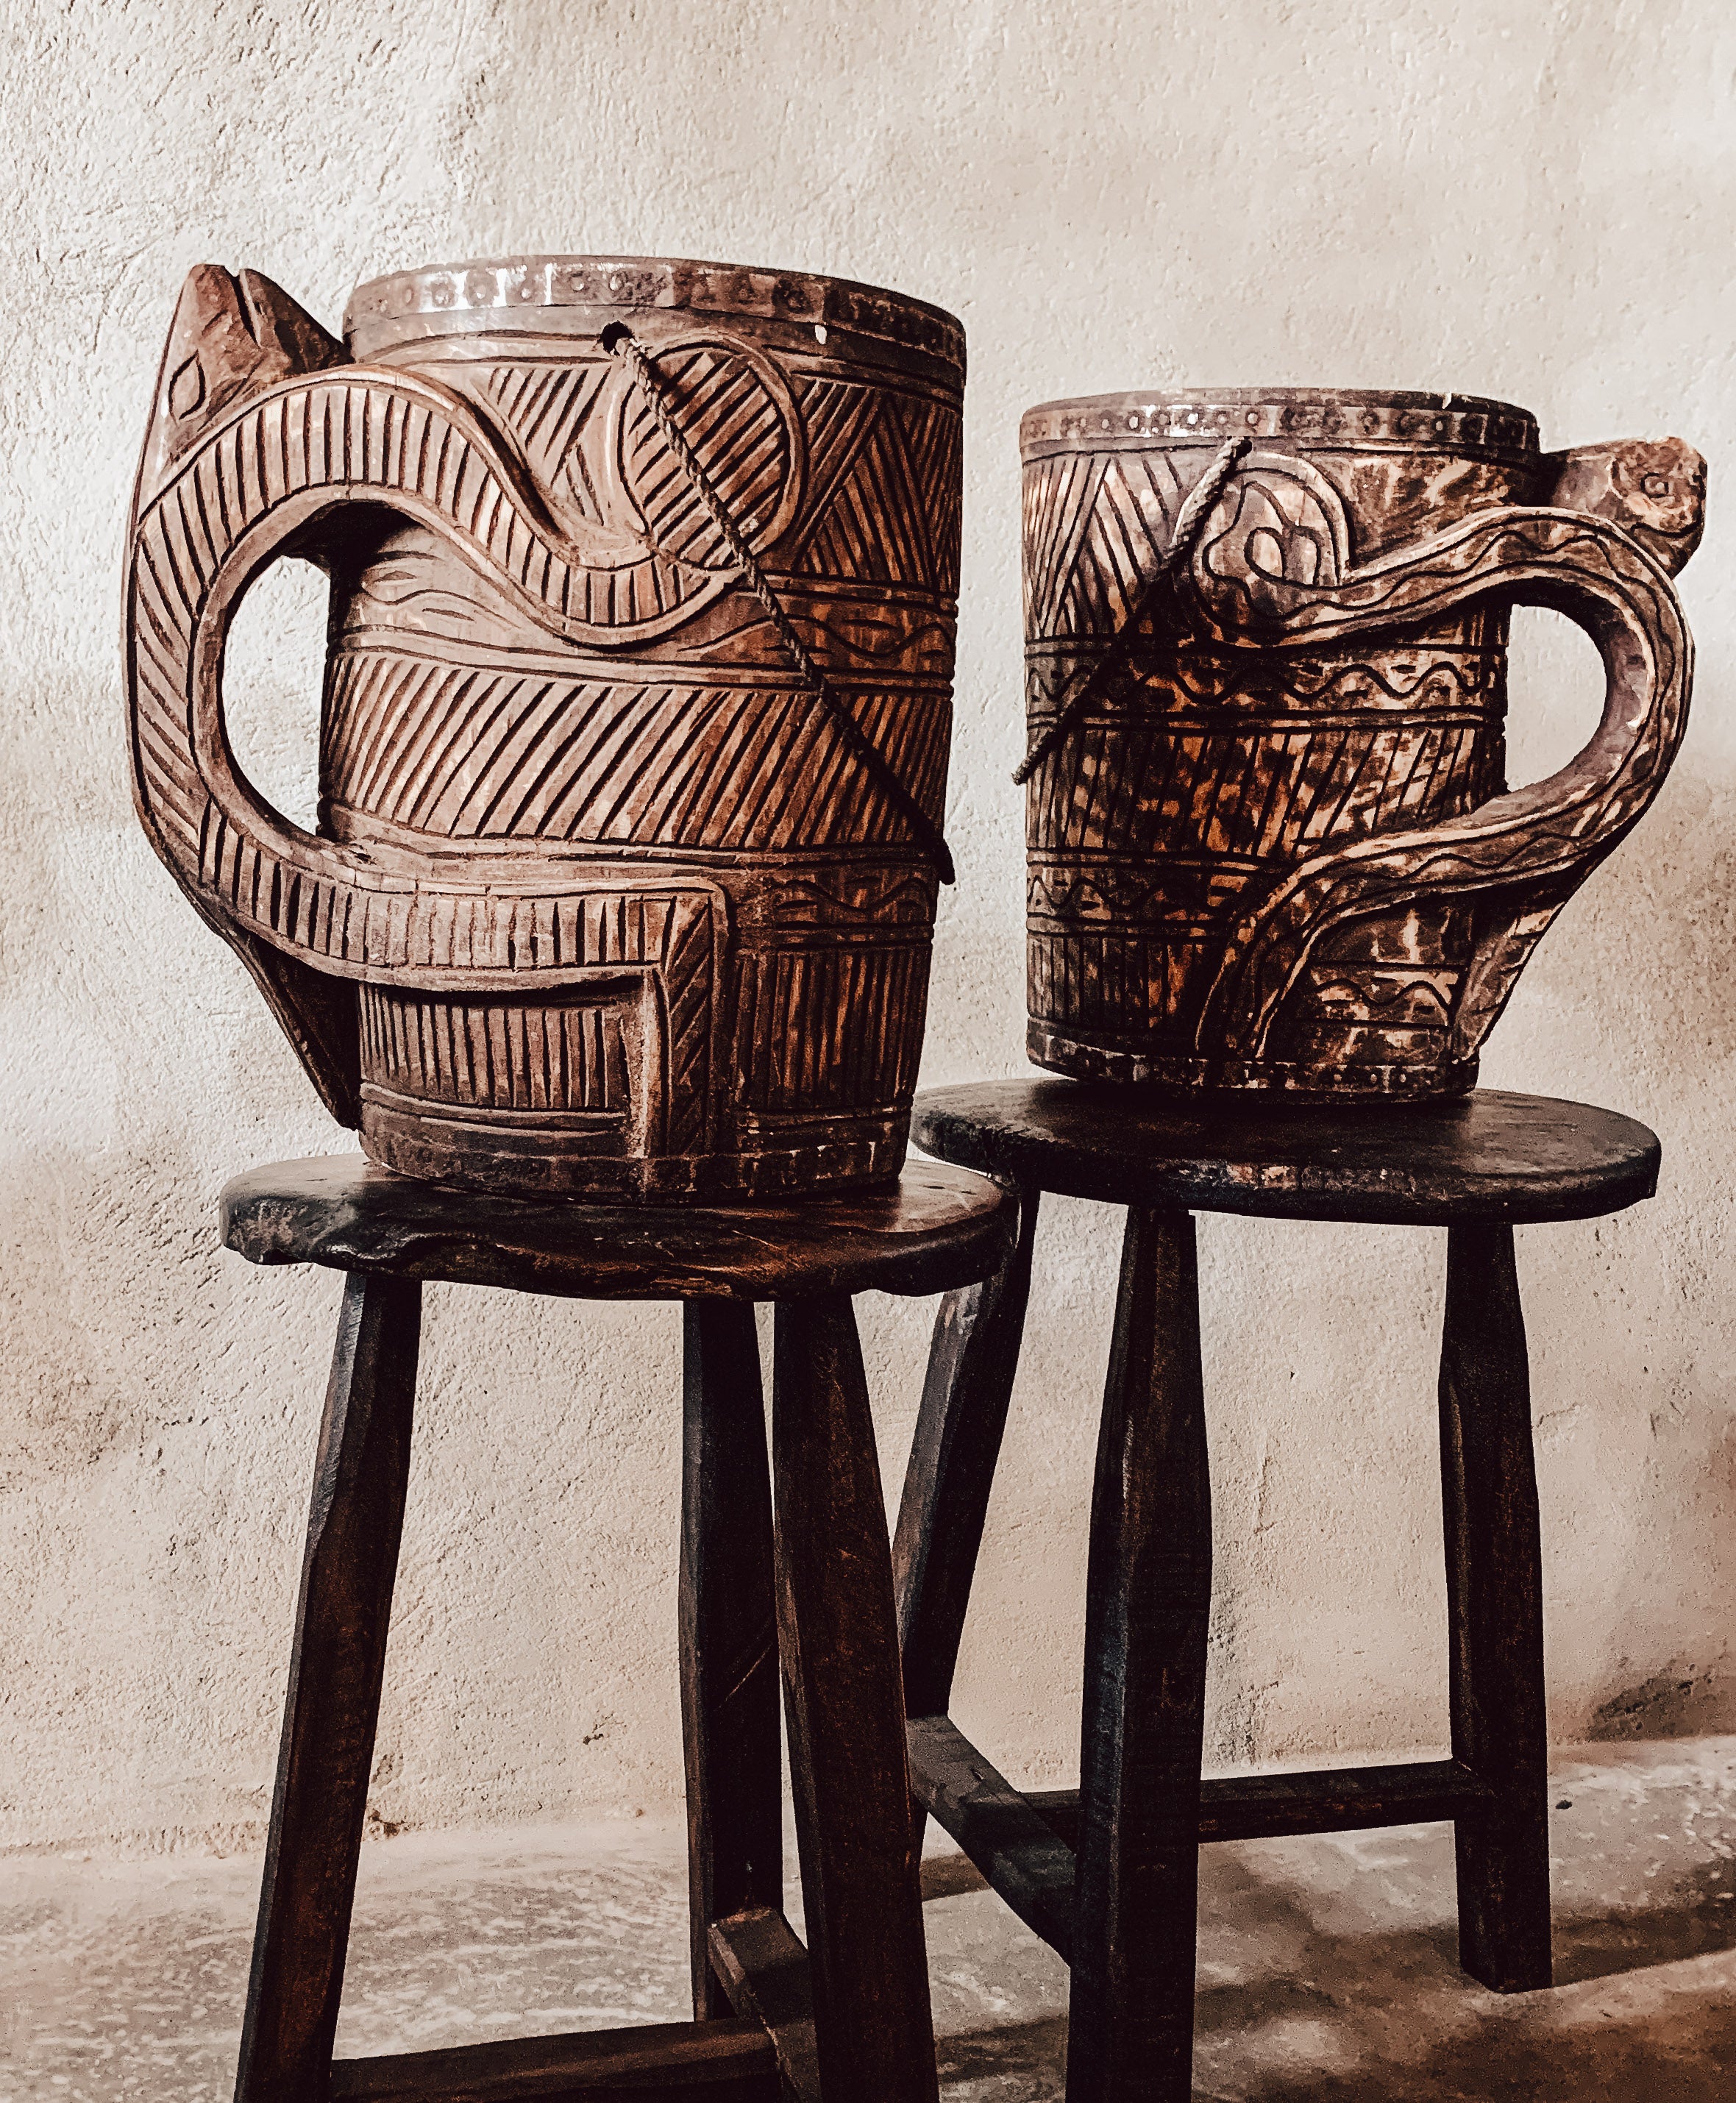 Carved wooden jug with handle